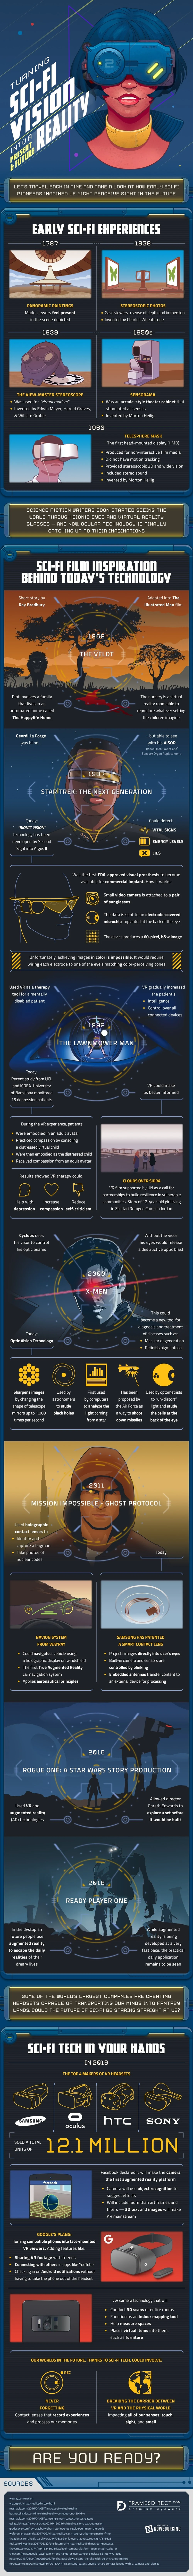 Turning Science Fiction Vision Into A Present & Future Reality - infographic